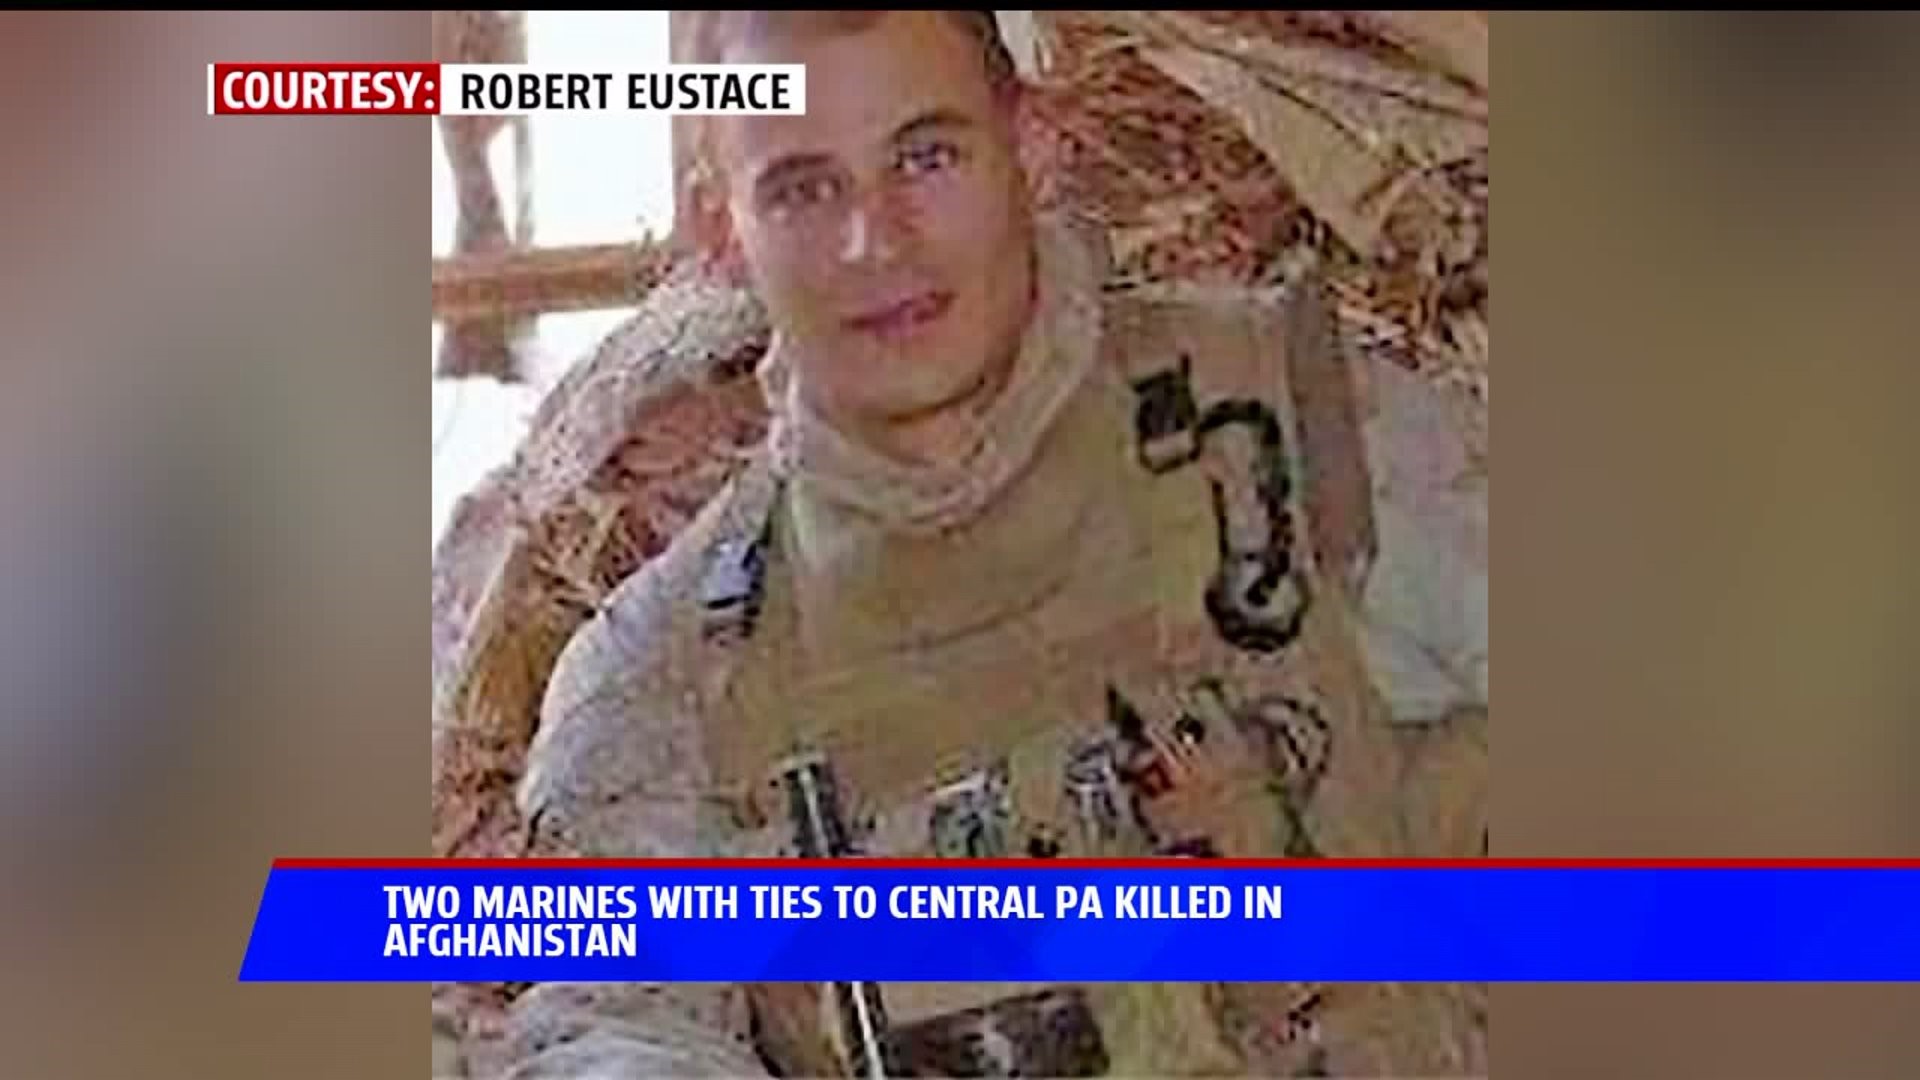 Two Marines With Ties to Central PA Killed in Afghanistan